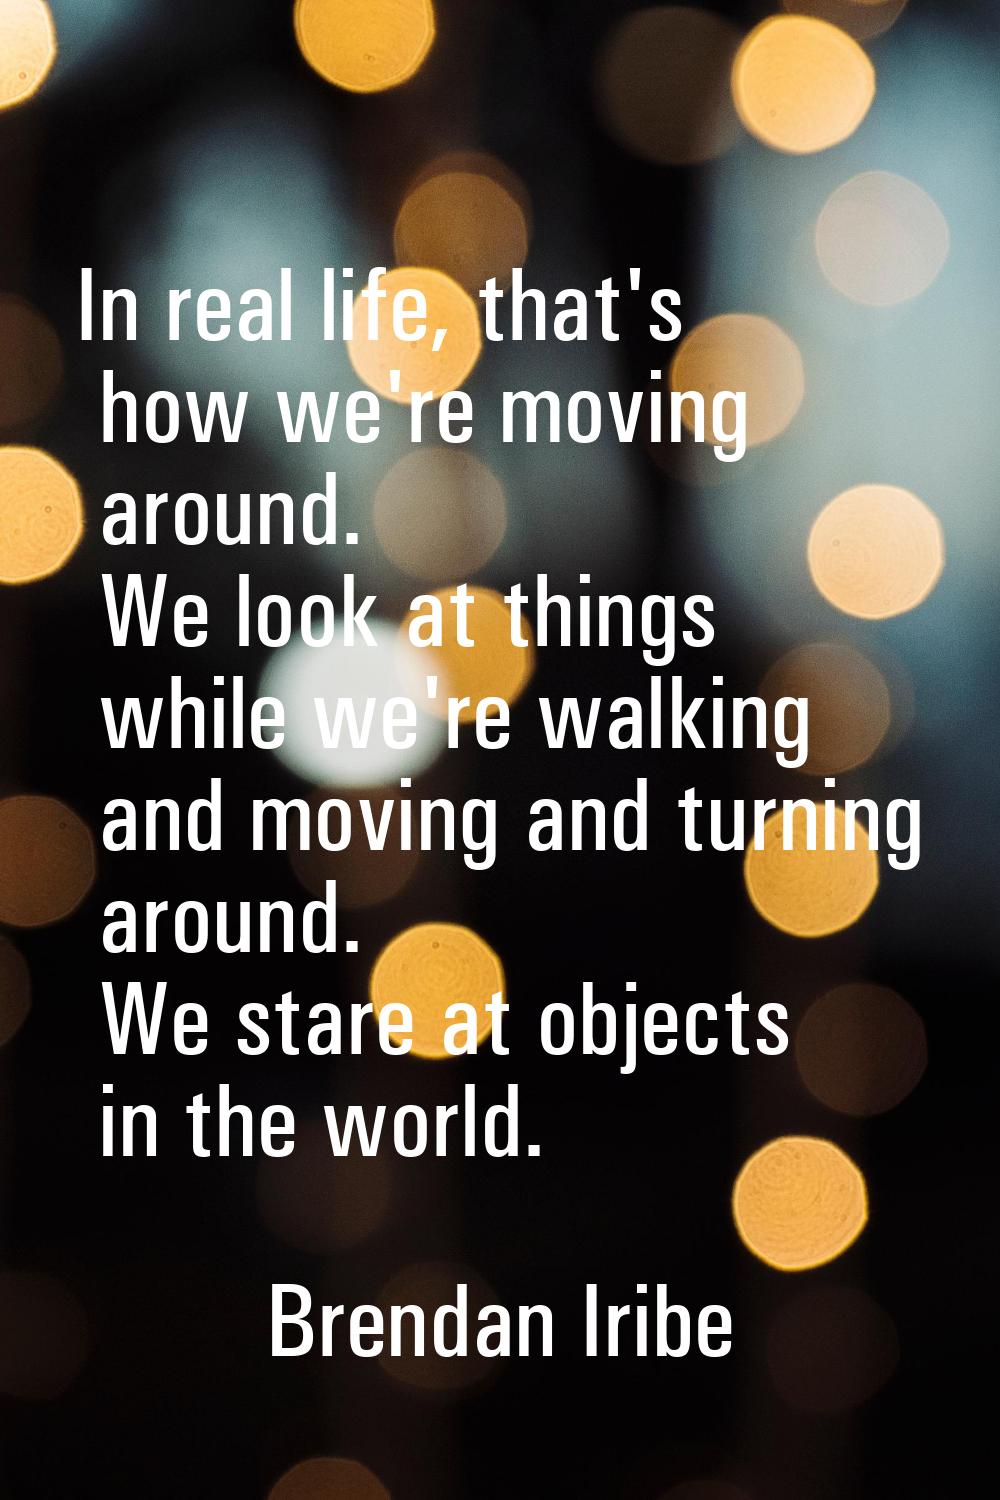 In real life, that's how we're moving around. We look at things while we're walking and moving and 